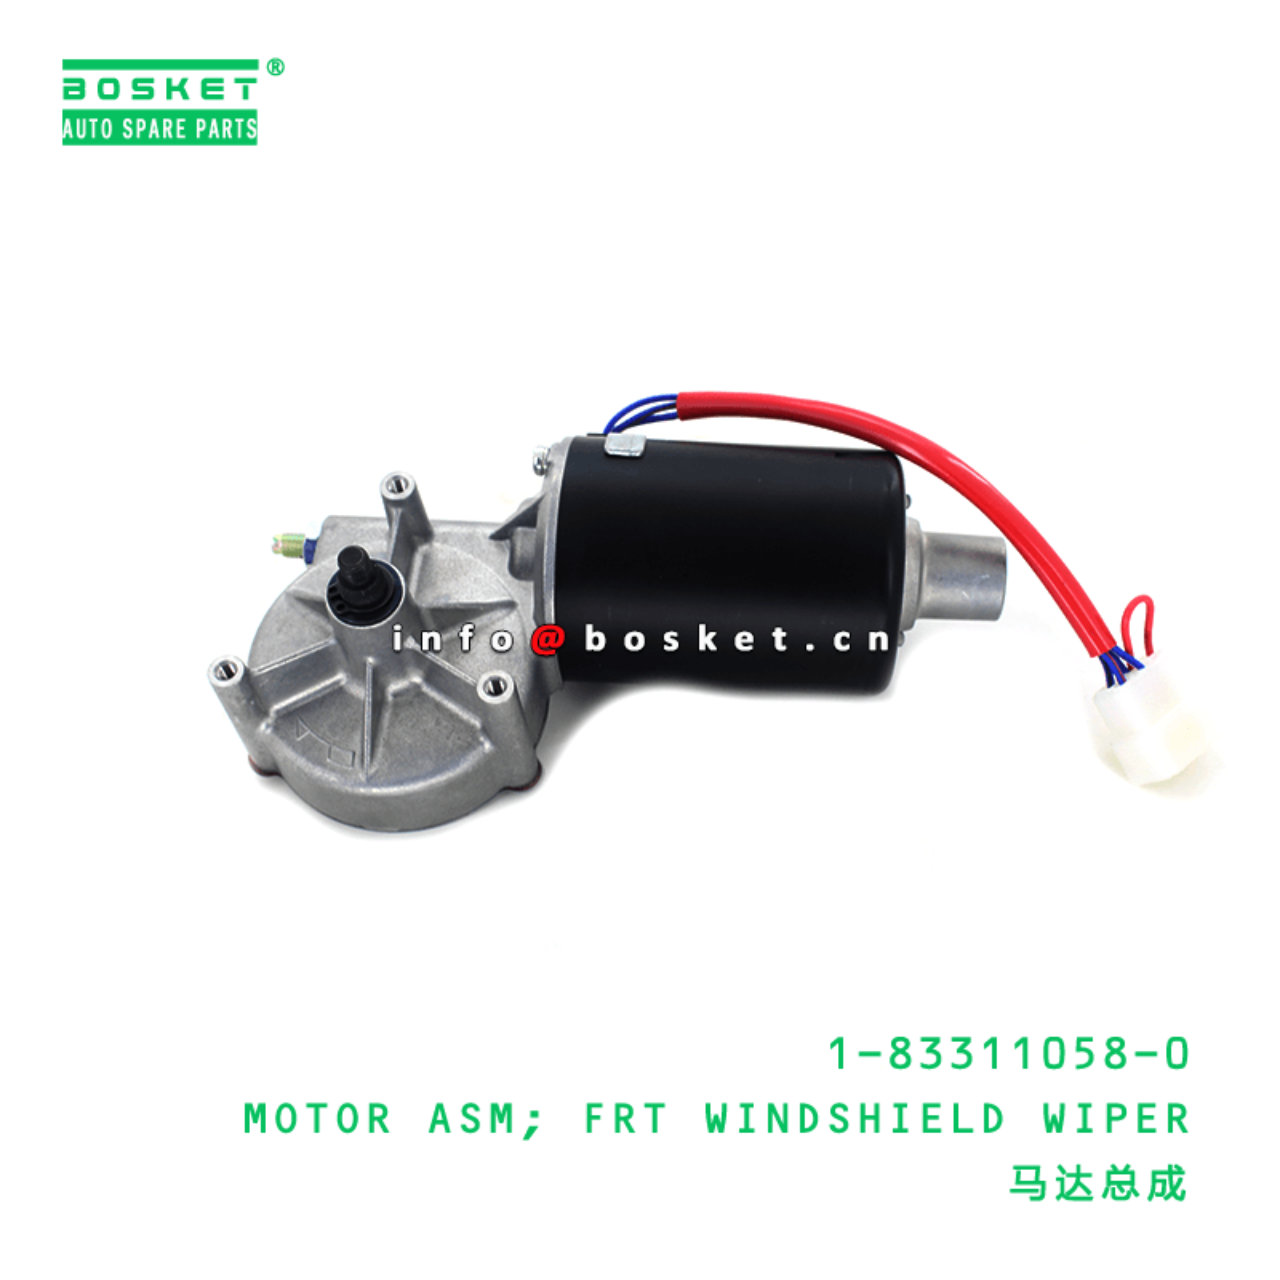 1-83311058-0 Front Windshield Wiper Motor Assembly 1833110580 Suitable for ISUZU MR